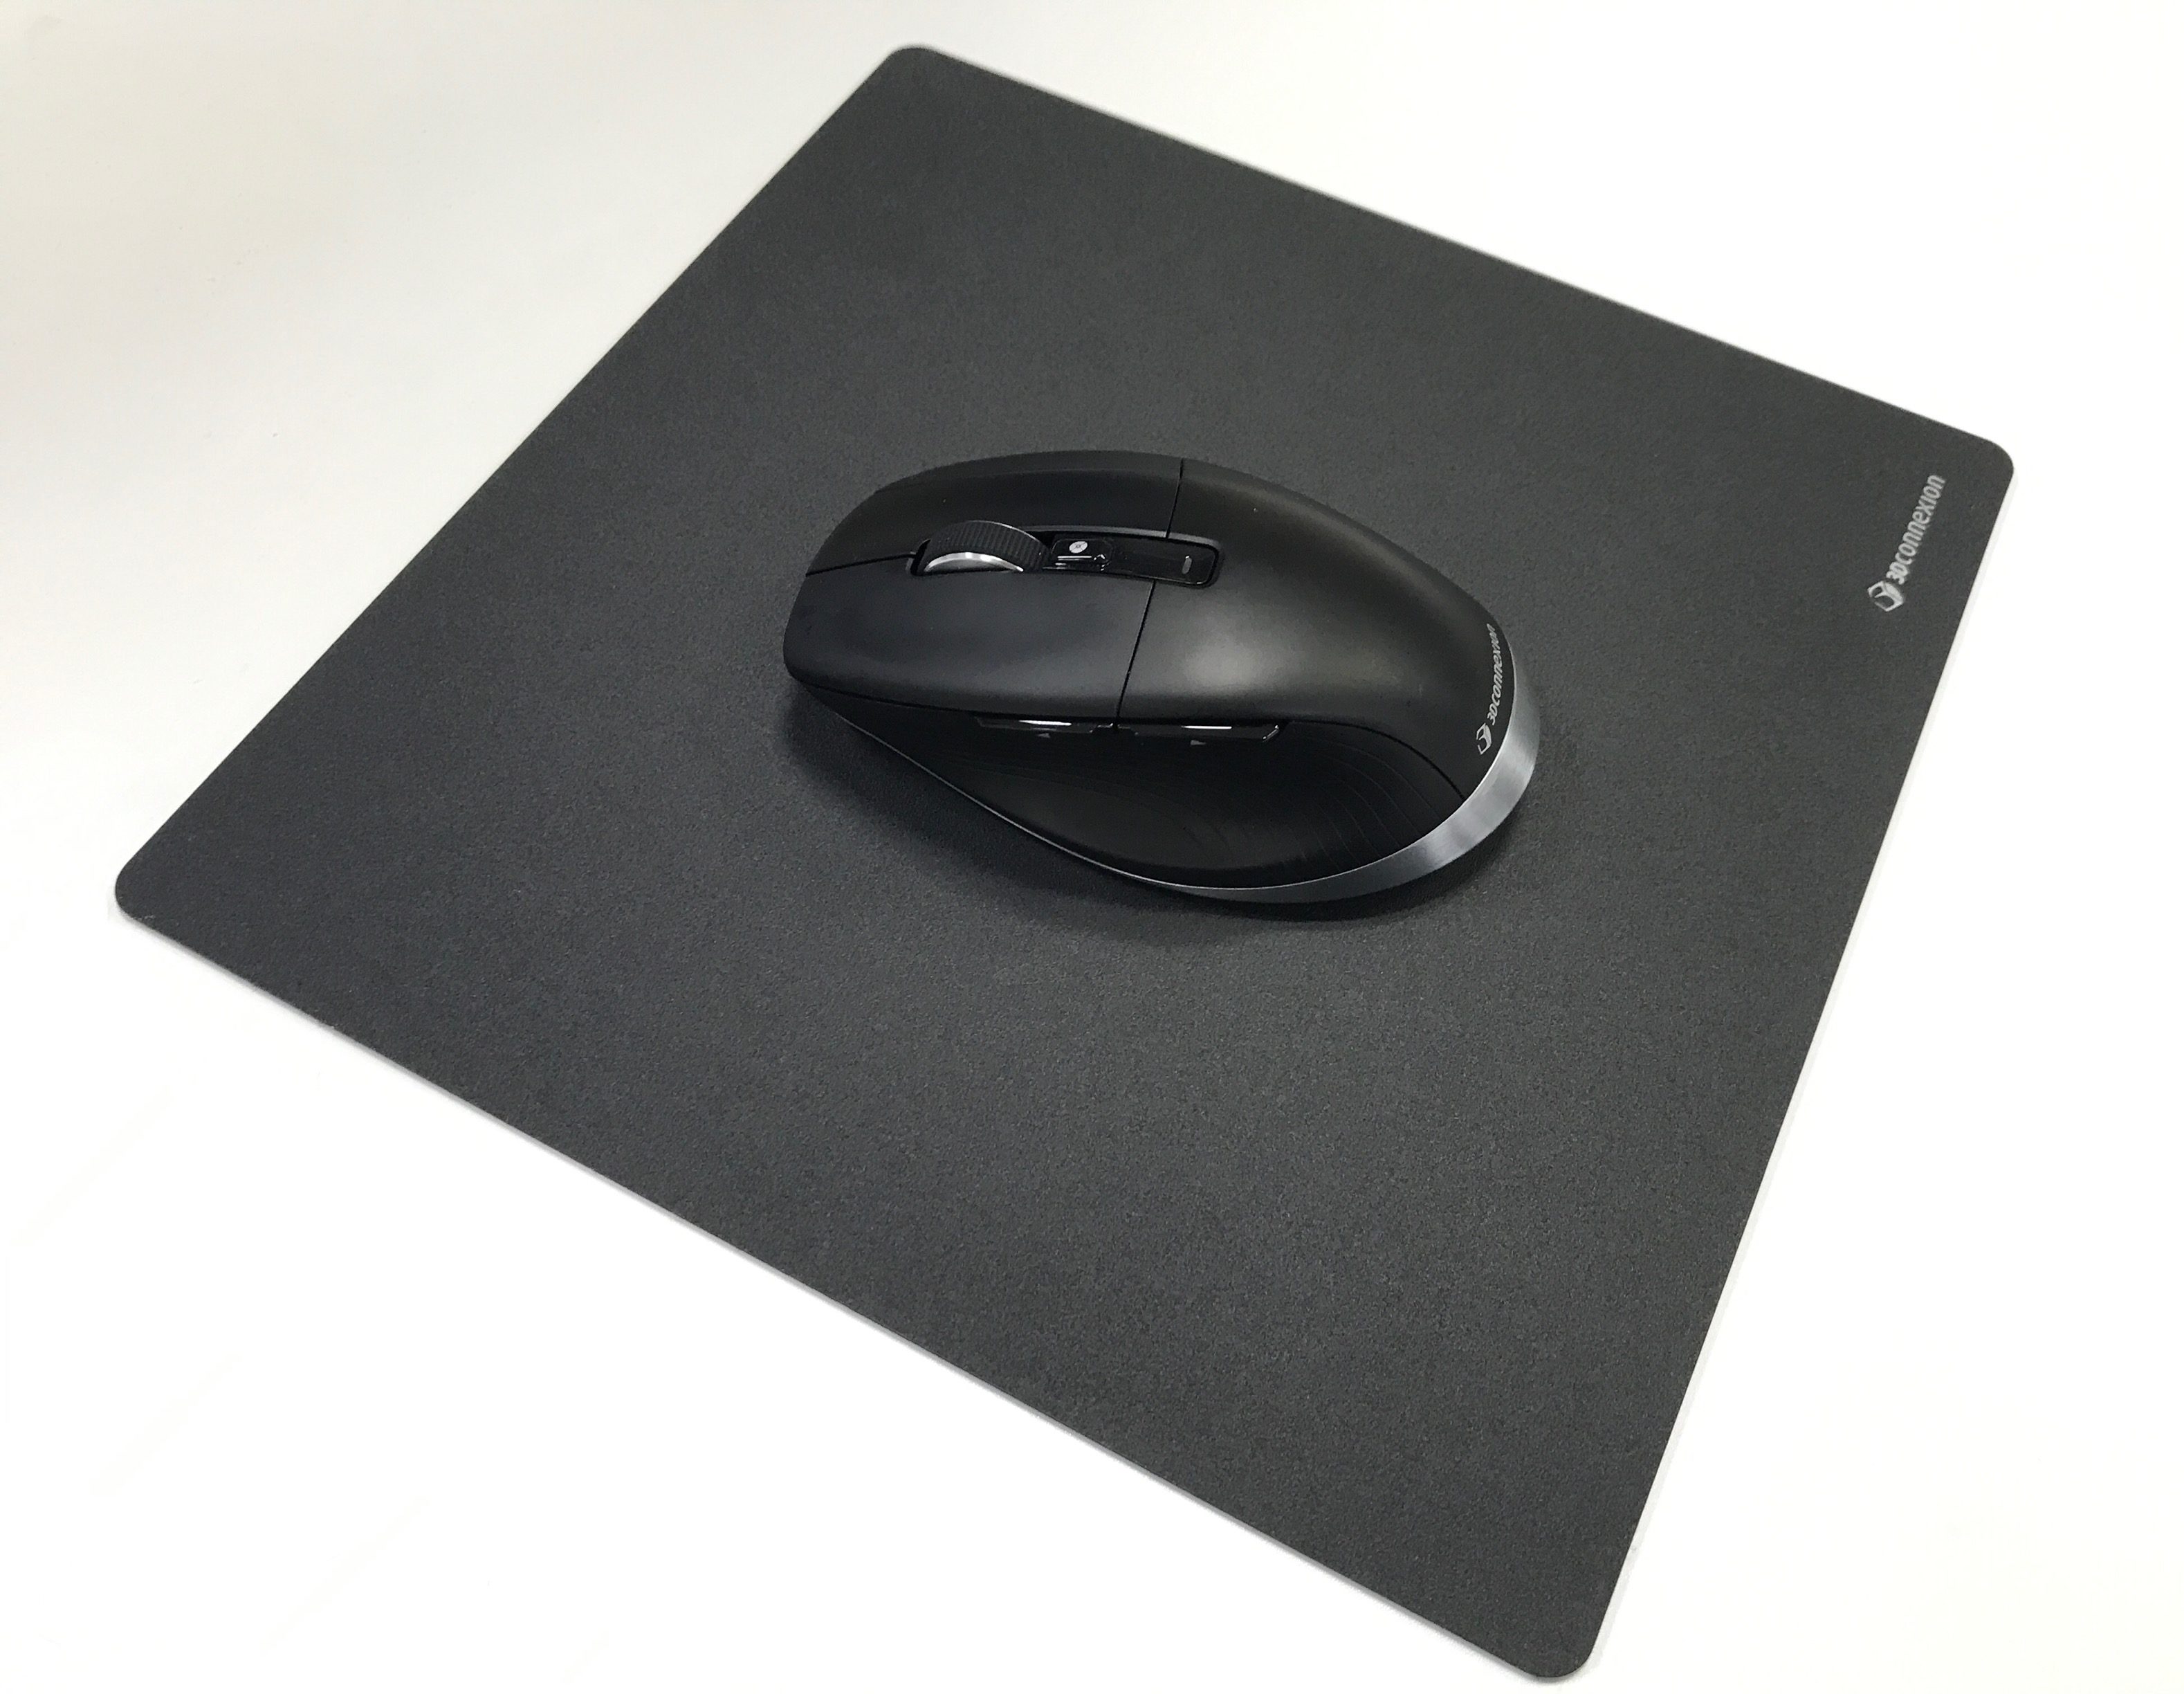 3D Connextion CadMouse Pro Wireless本体とマウスパッド